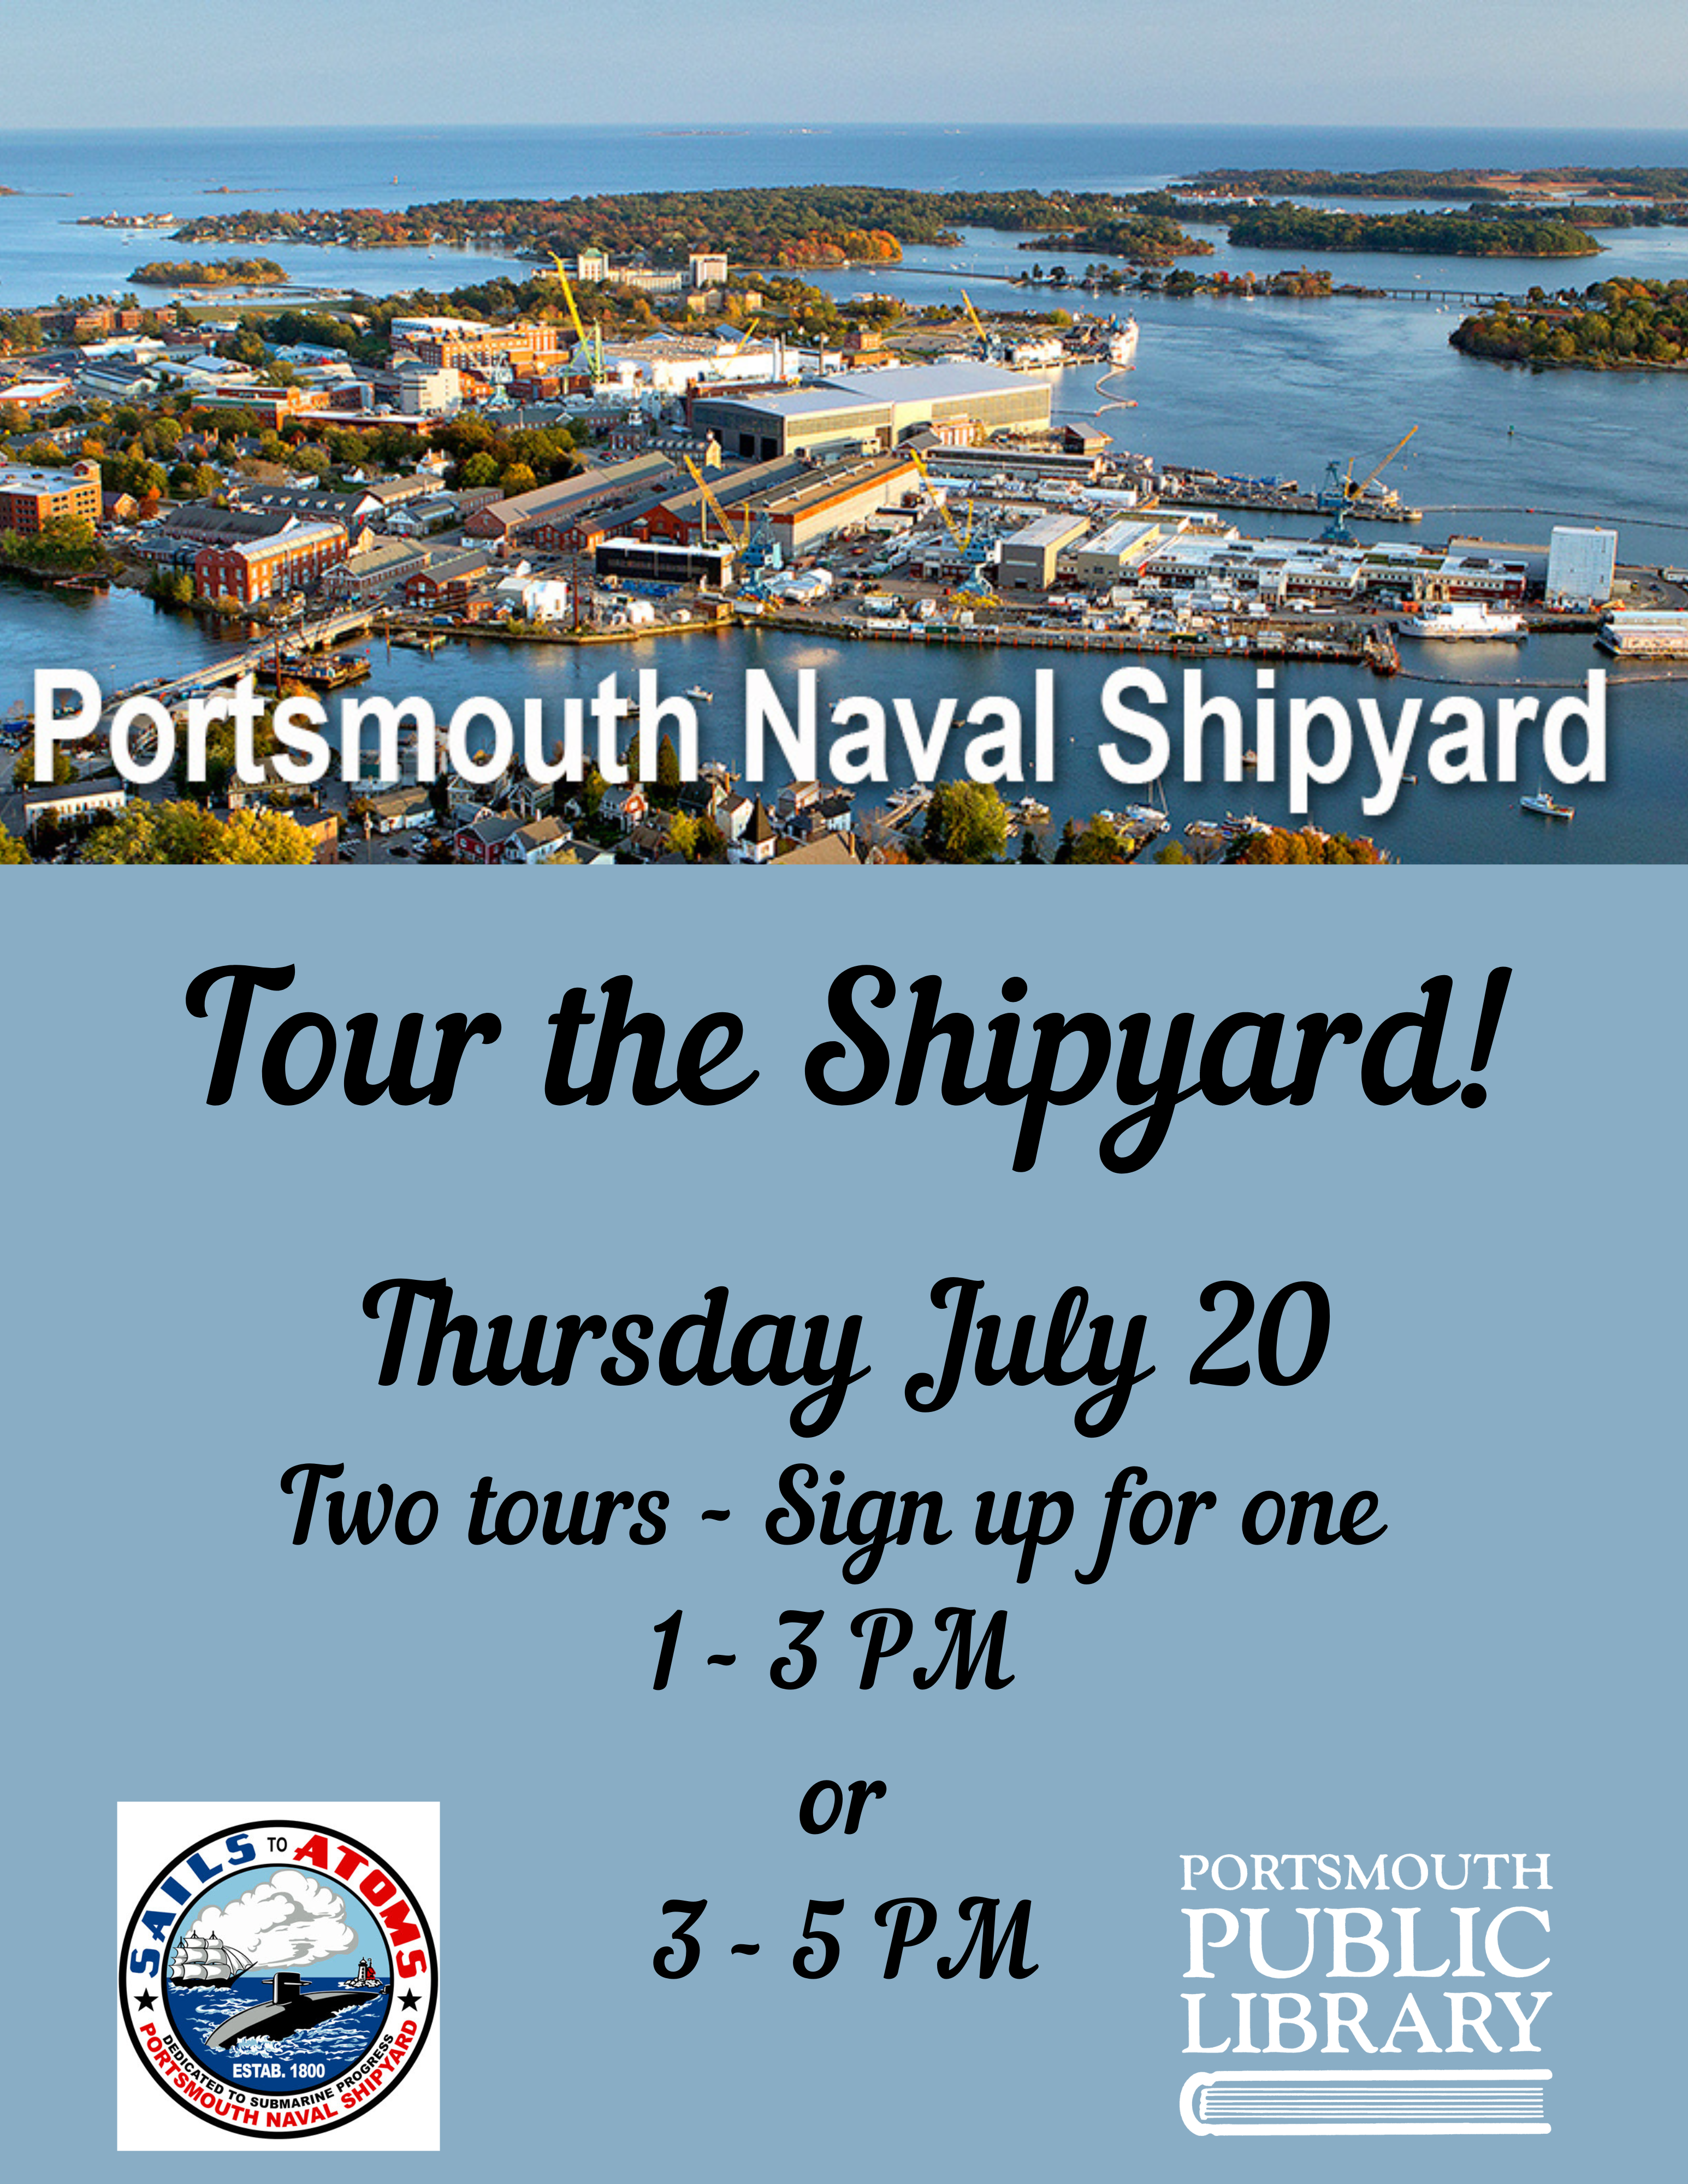 Portsmouth Naval Shipyard Tour the Shipyard July 20 two tours  sign up for one 1-3 PM or 3-5 PM